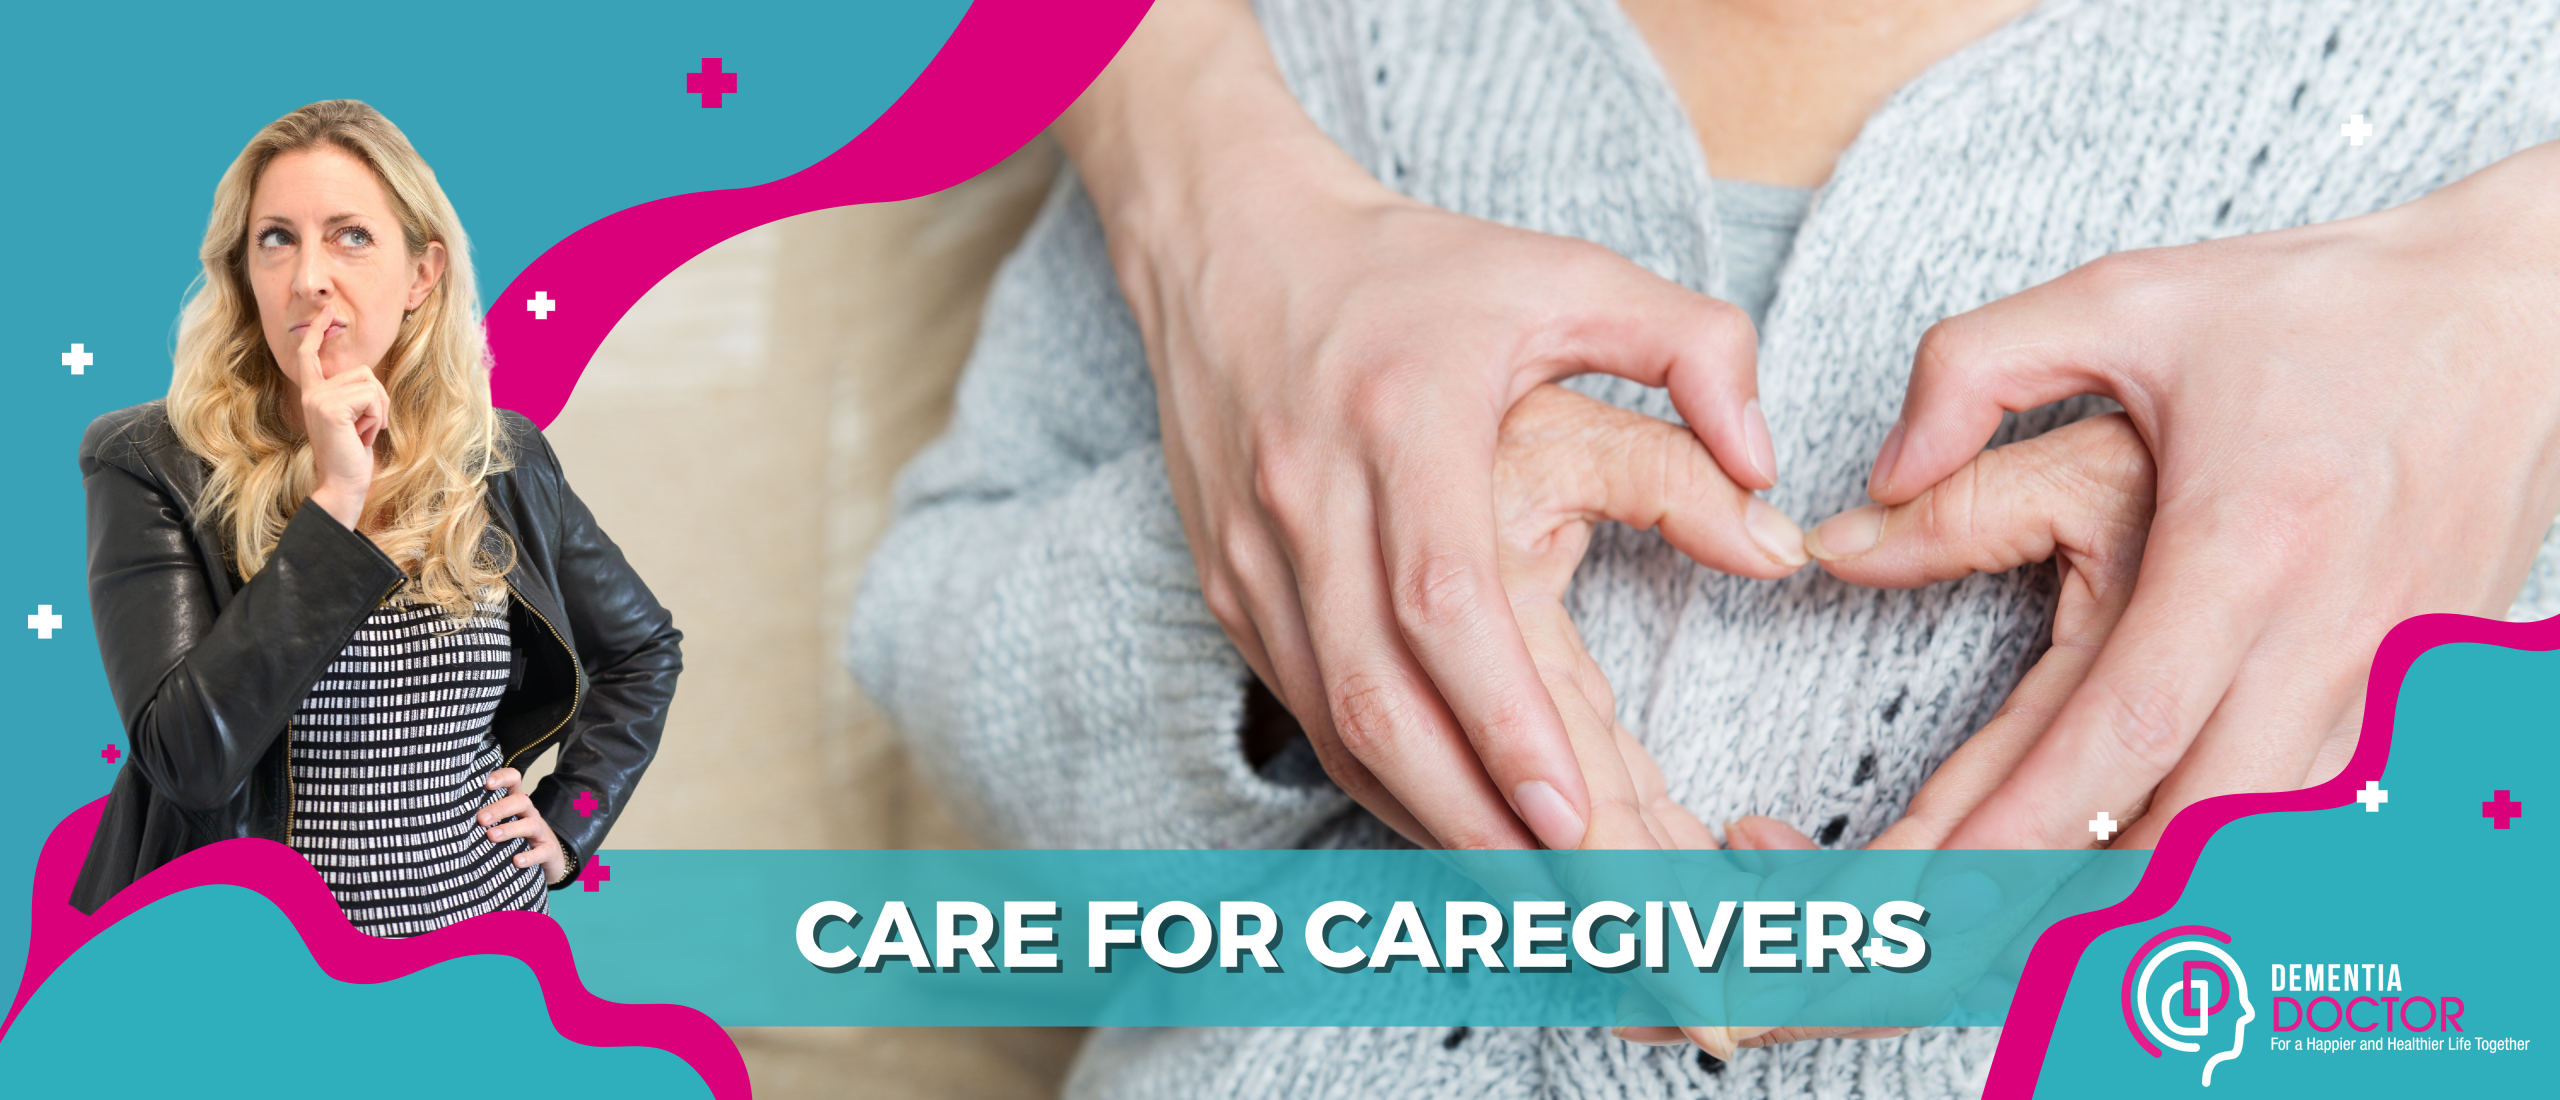 Care for caregivers